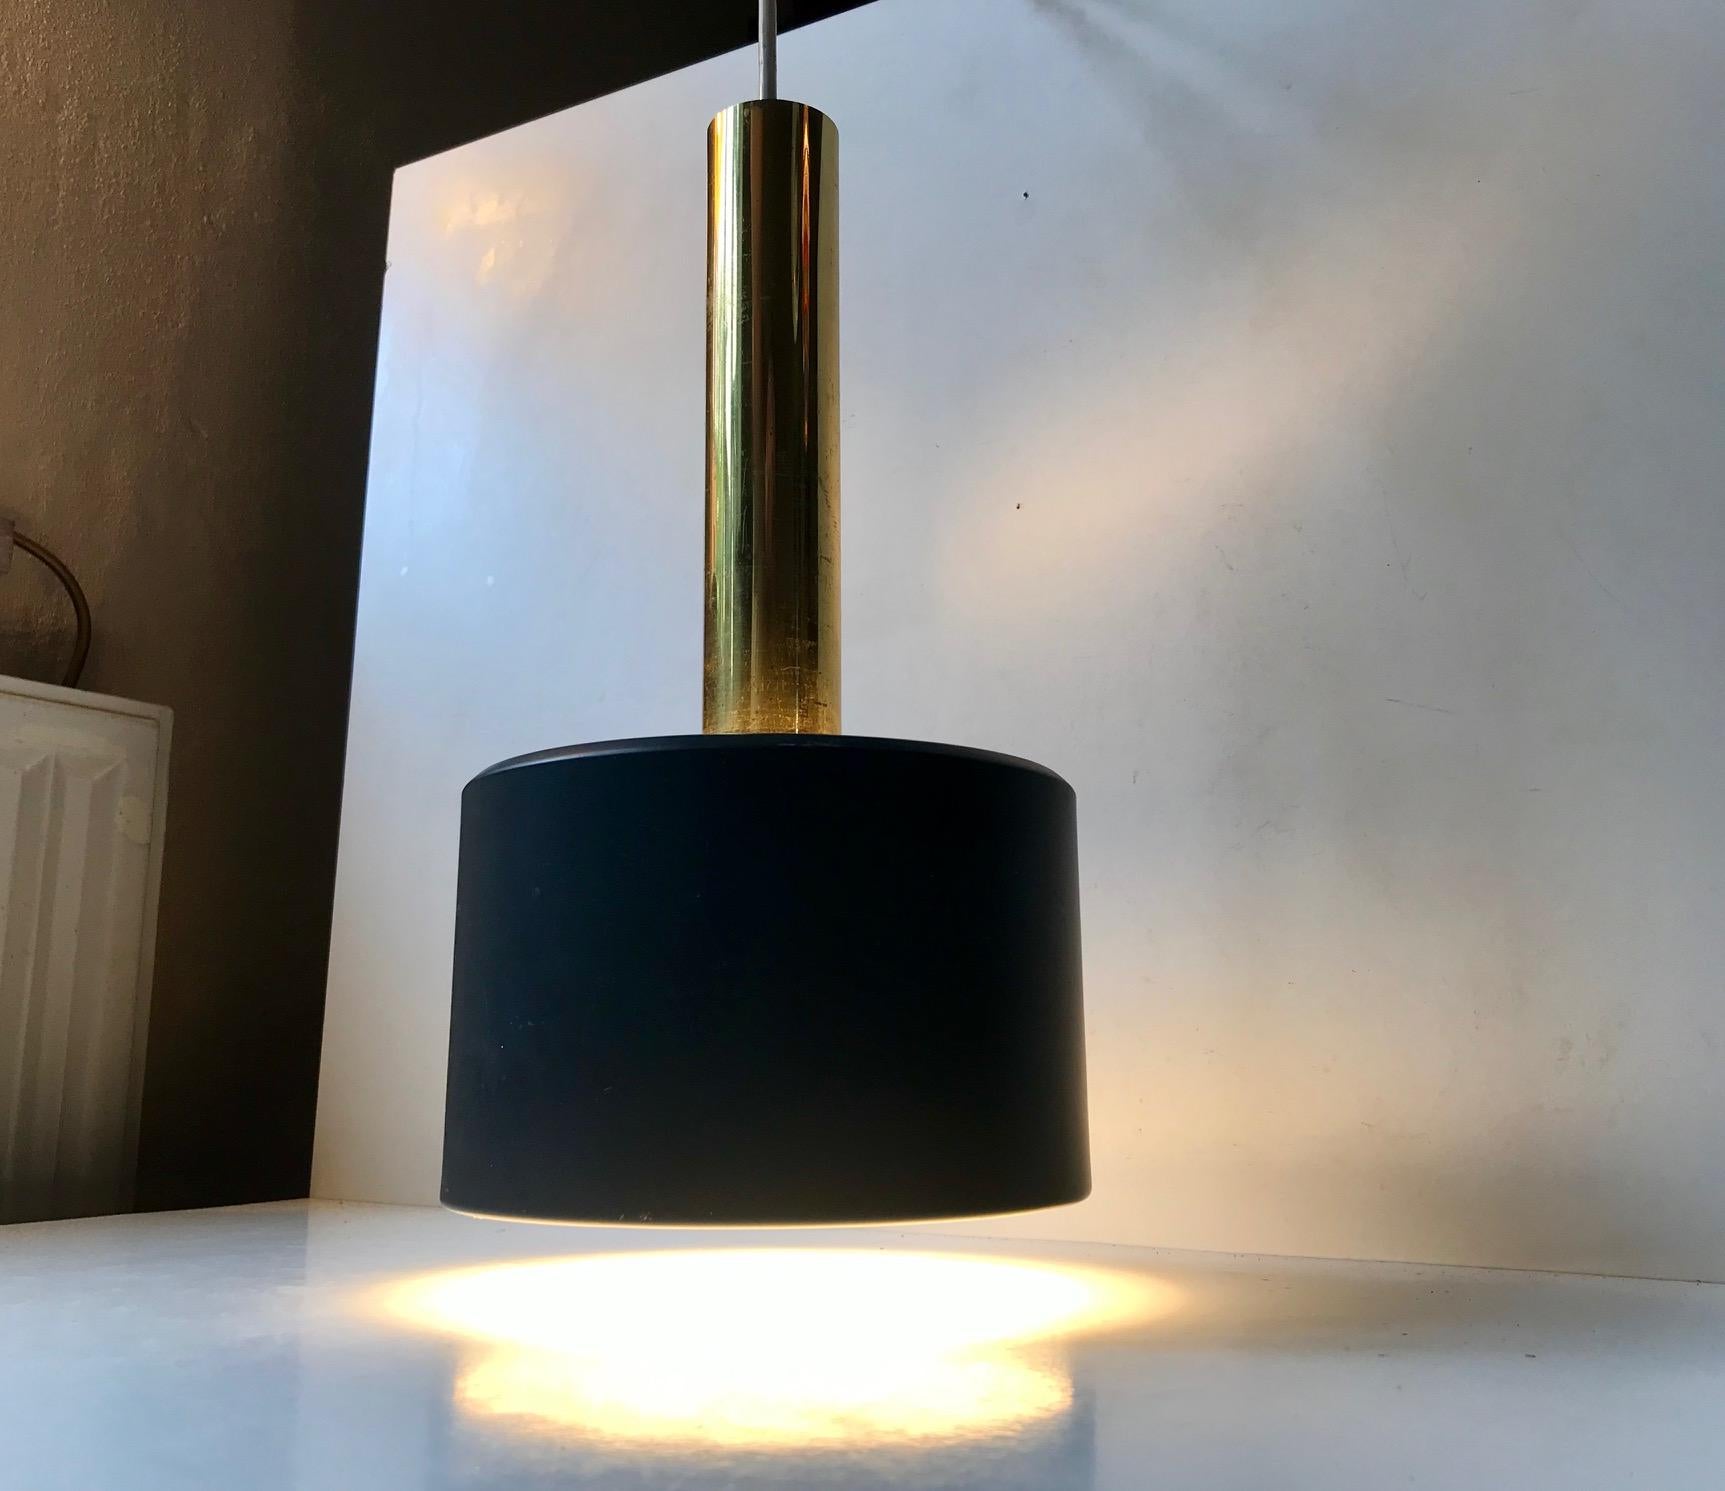 This Scandinavian pendant light made from brass and dark grey powder coated aluminum. At first glance it looks similar to Jo Hammerborg's 'Club' pendant for Fog & Mørup. This one is slightly different. It was manufactured during the 1960s probably